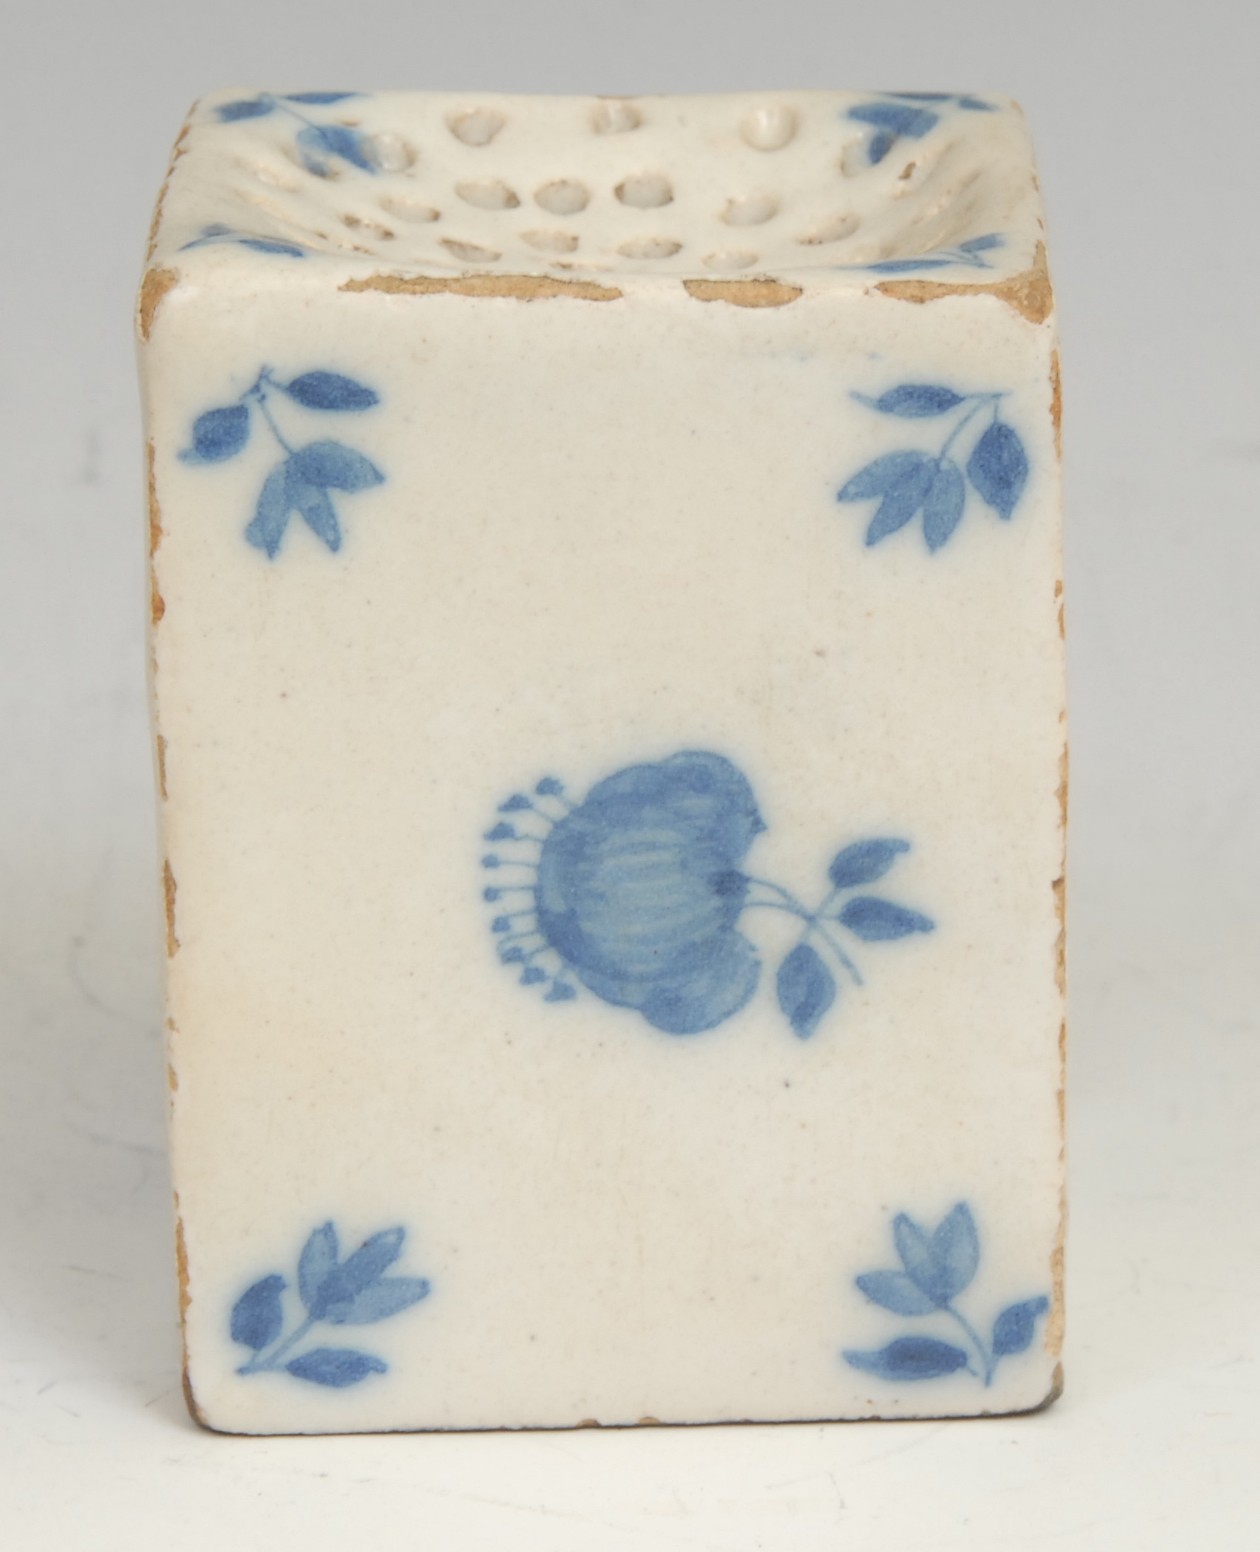 An 18th century Delft square pounce pot, painted in tones of blue with scattered floral sprigs, - Image 4 of 5